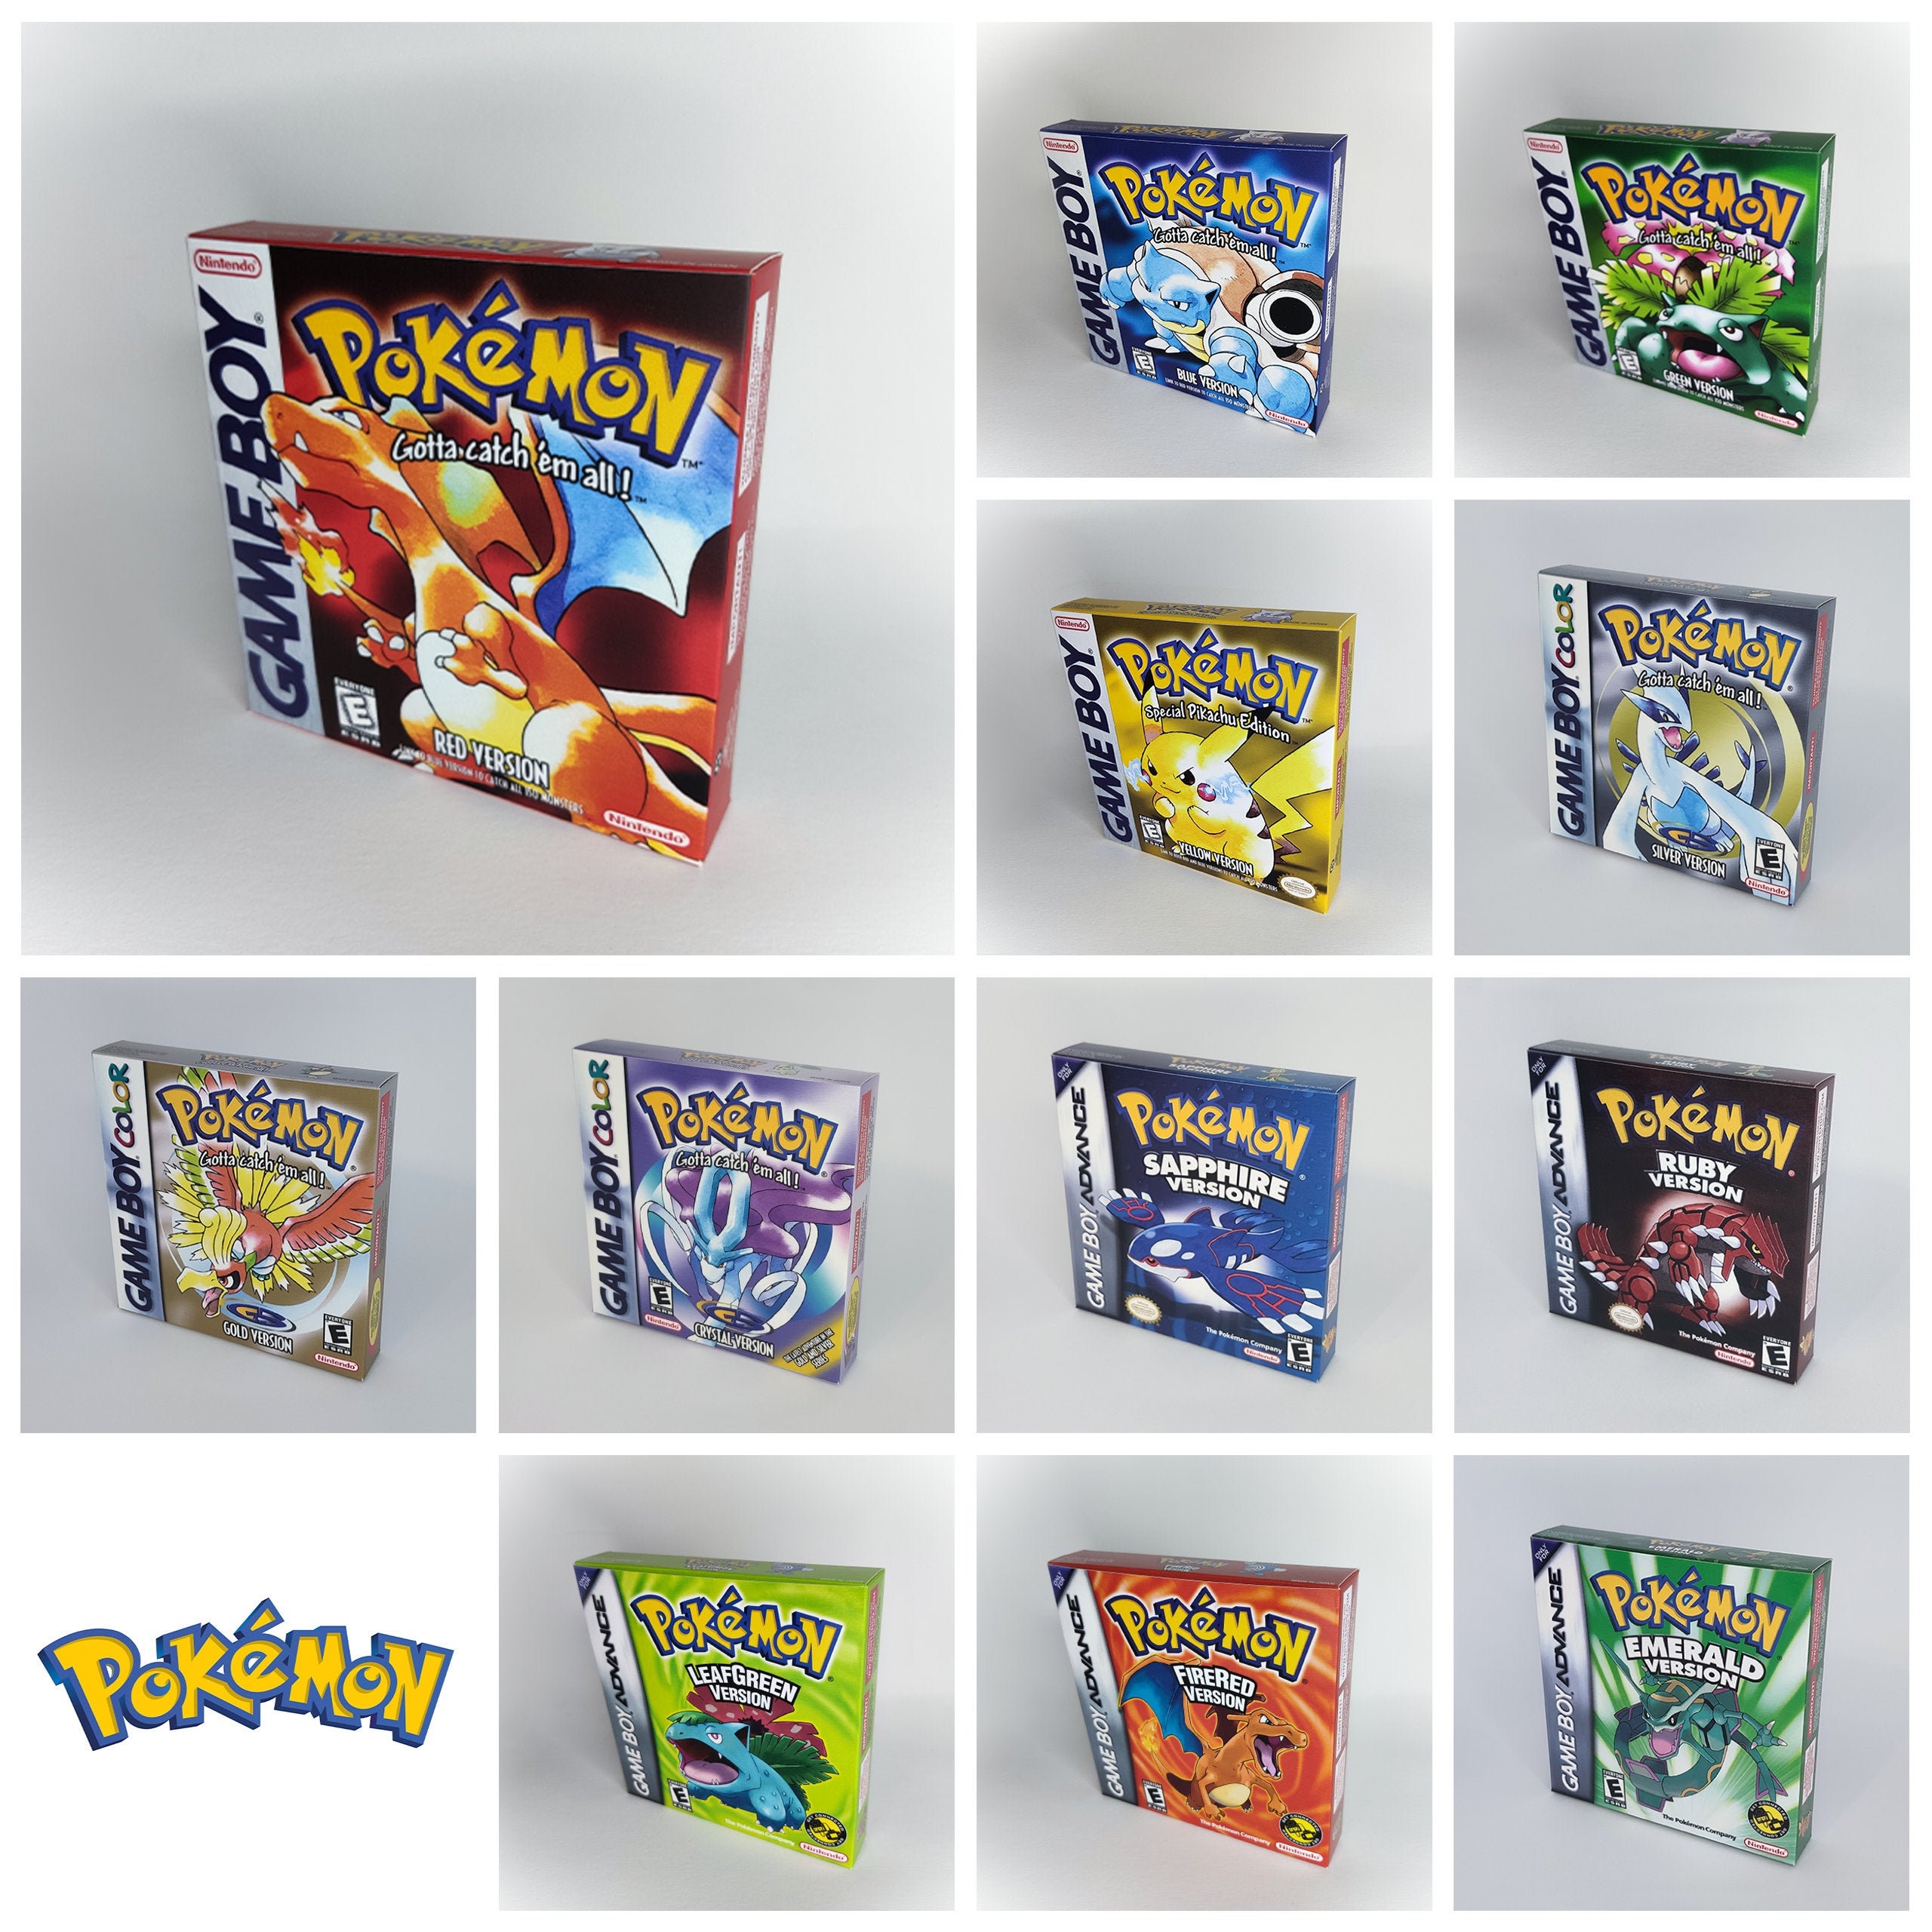 Pokémon Silver Yellow NDS Game Cards Boxed American English